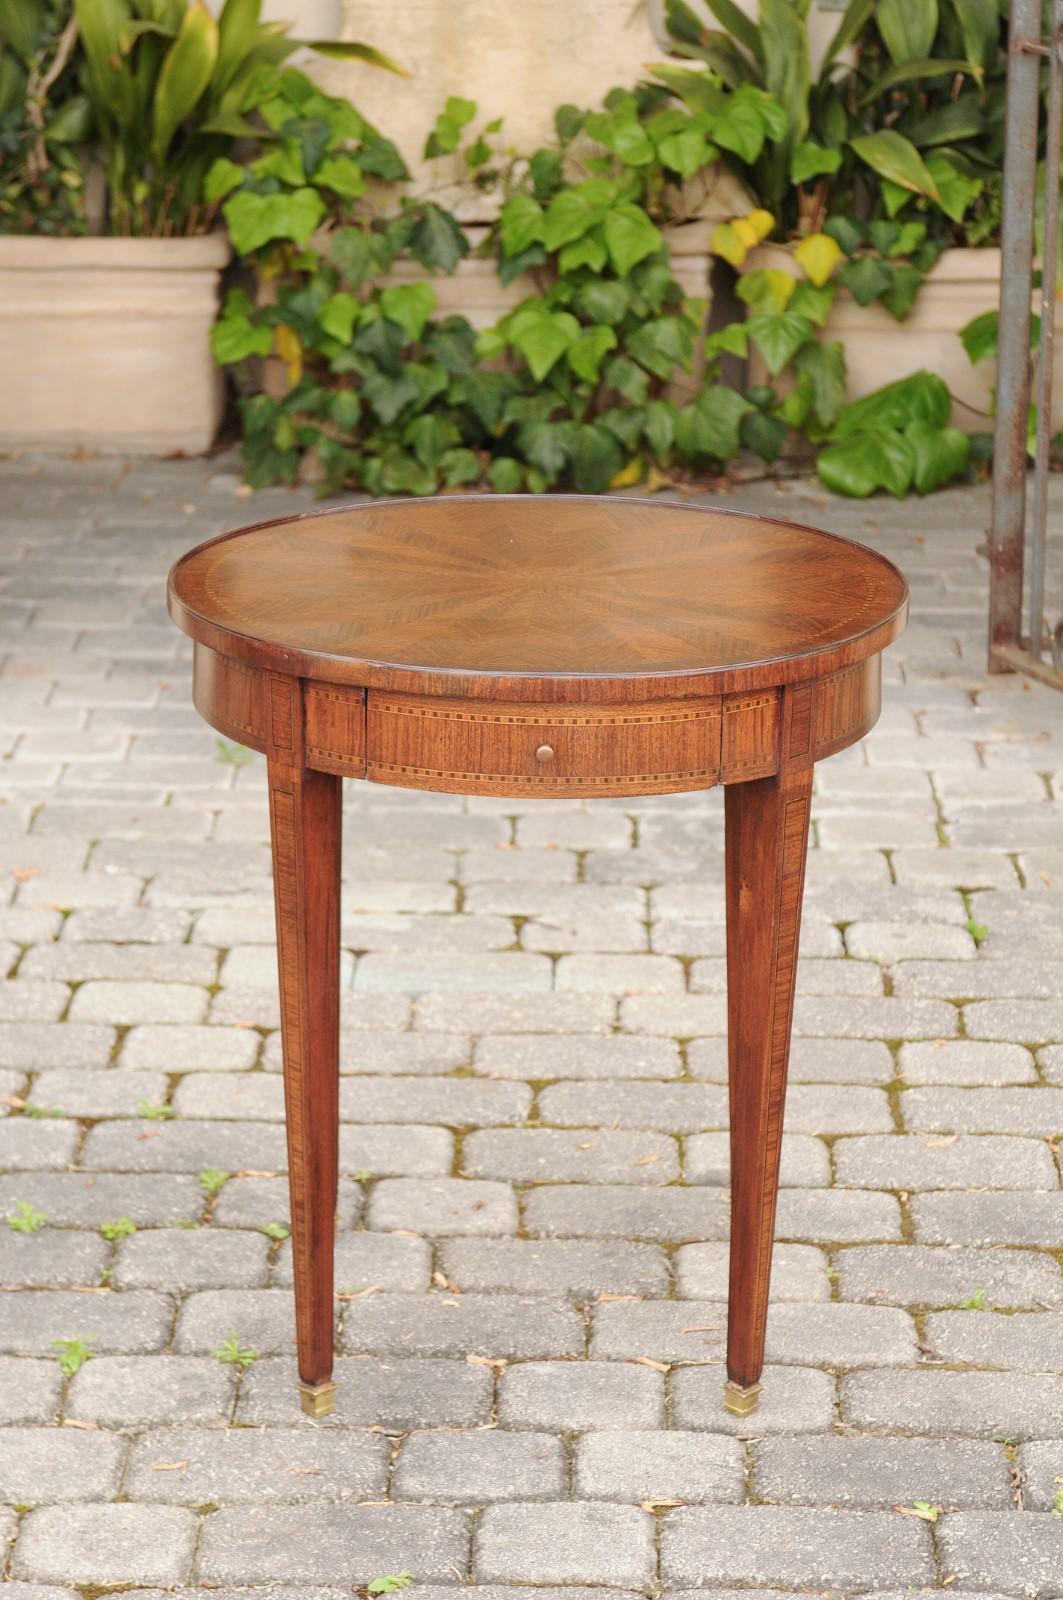 An English neoclassical style mahogany guéridon side table from the early 20th century, with inlaid accents, single drawer and radiating veneer. Born in England during the early years of the 20th century, this exquisite Edwardian side table features